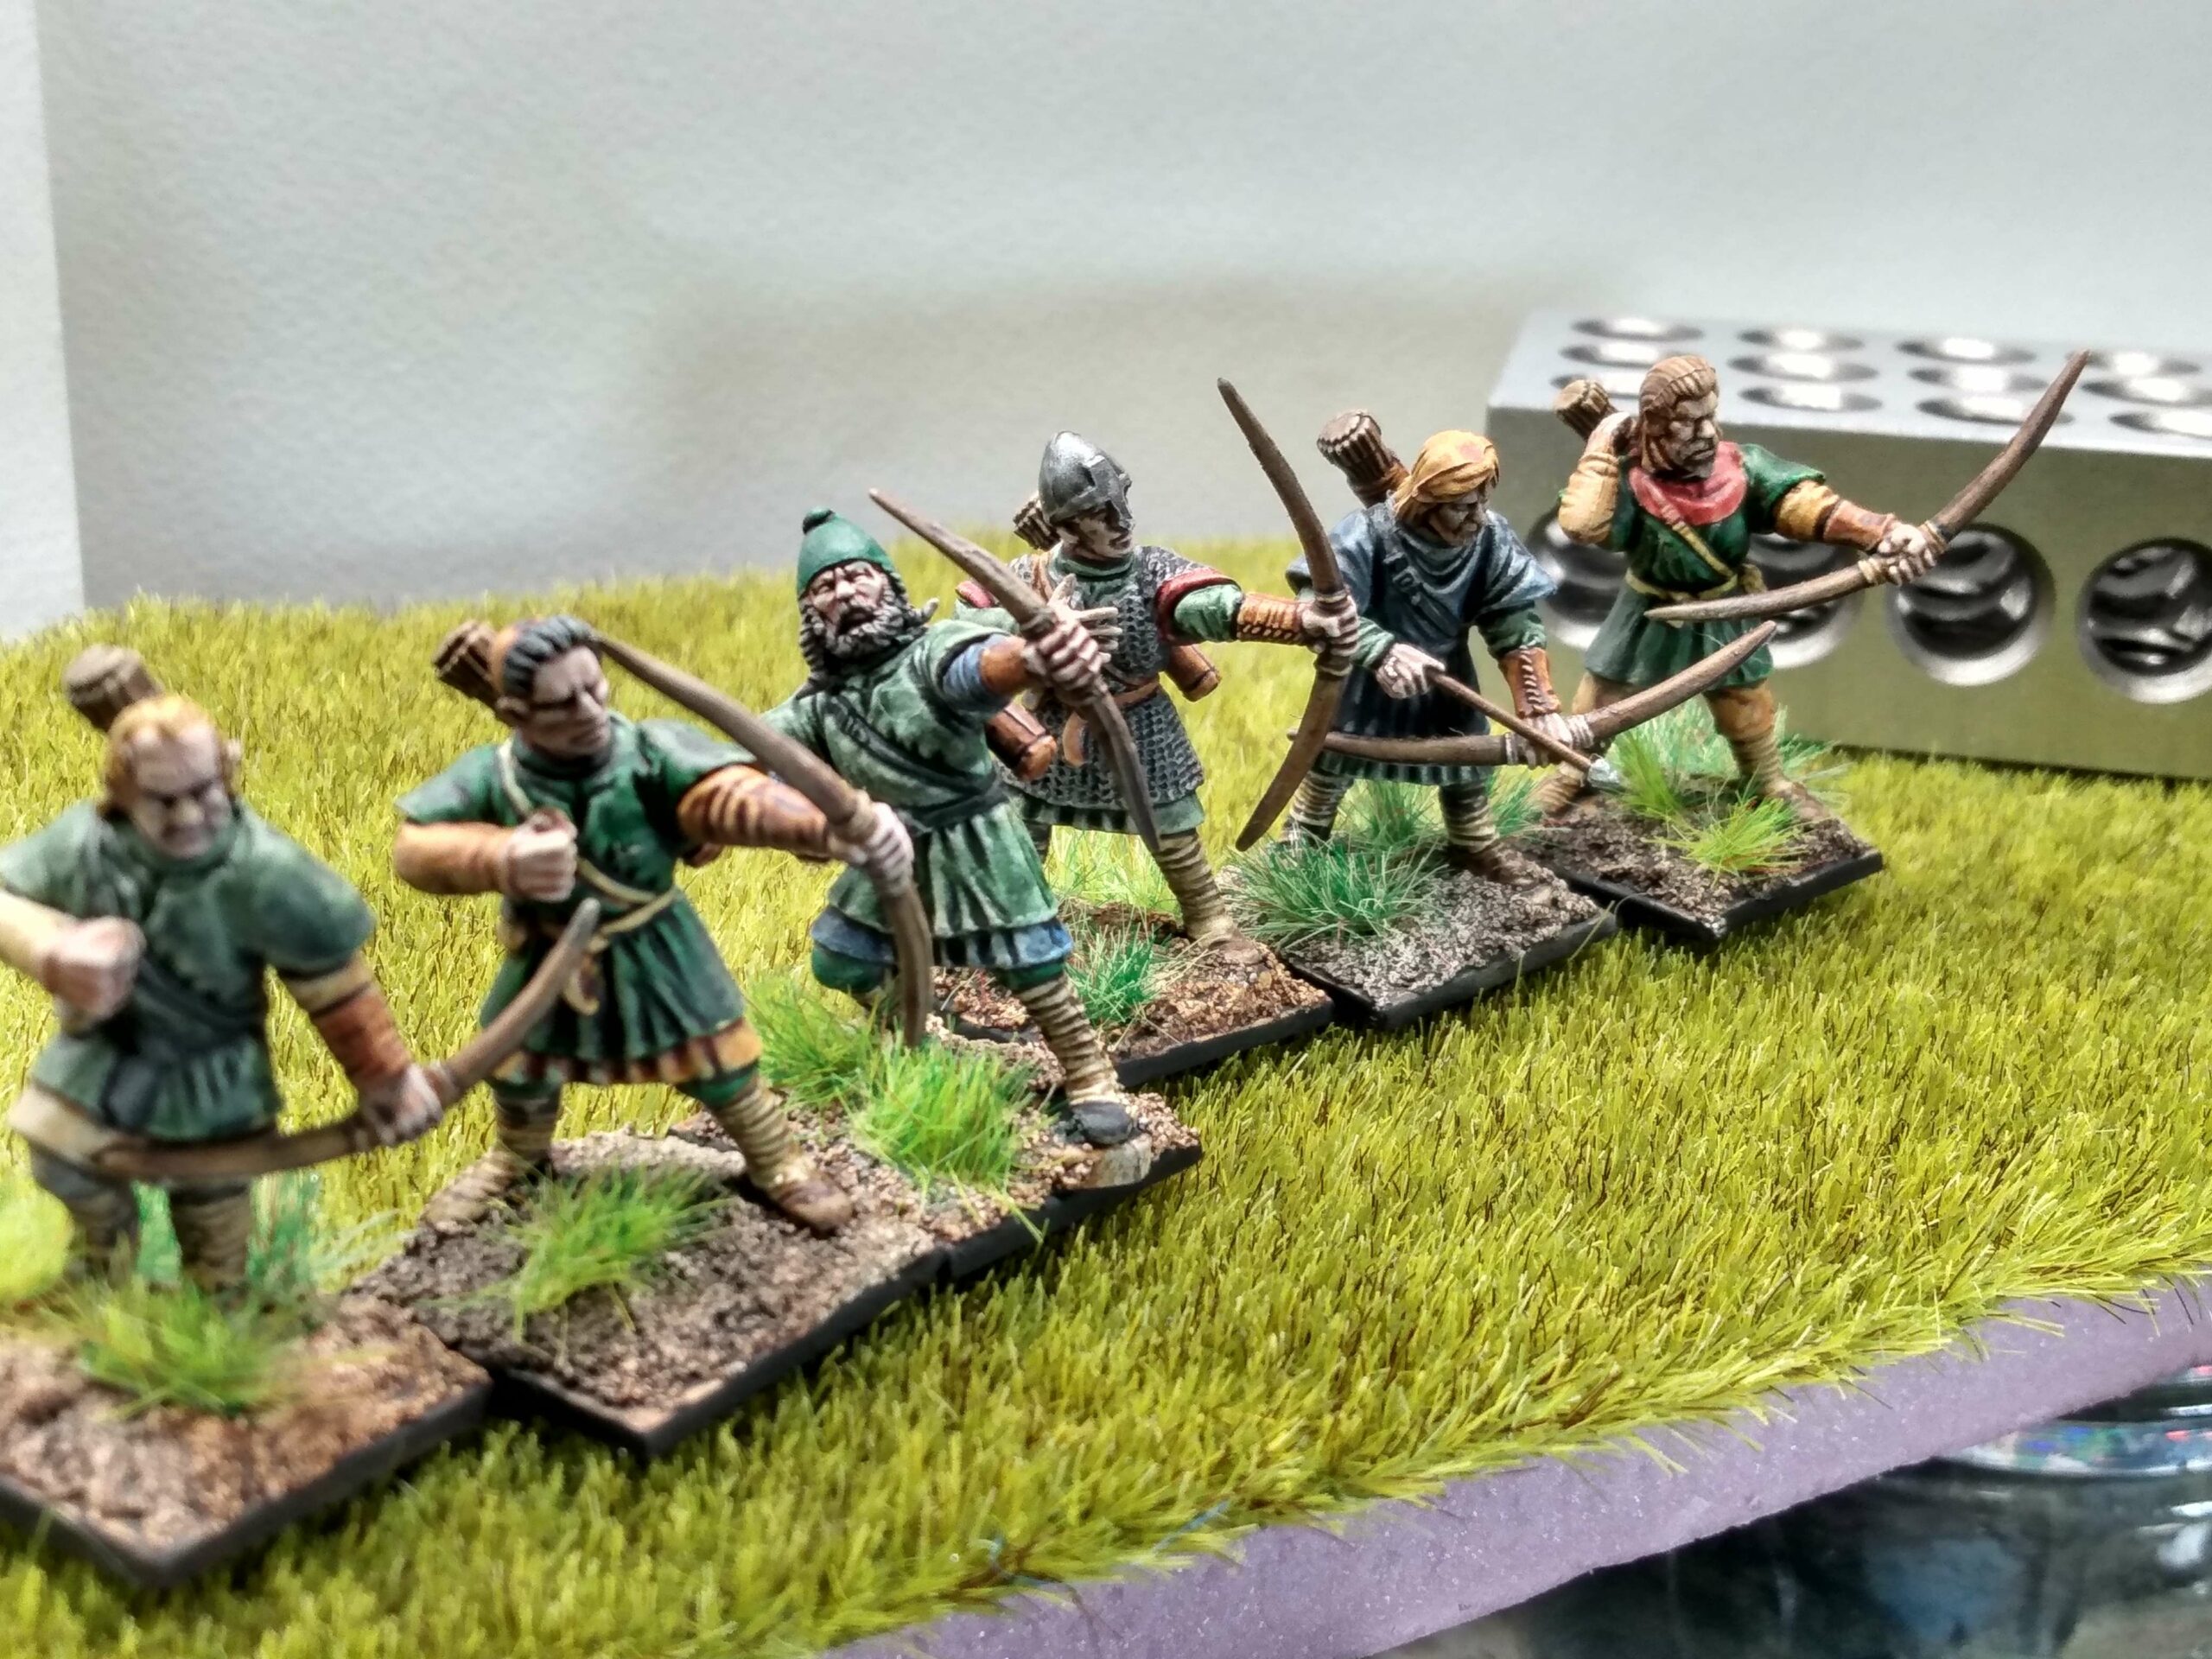 Painted 28mm medieval archers, manufactured by Conquest Games.